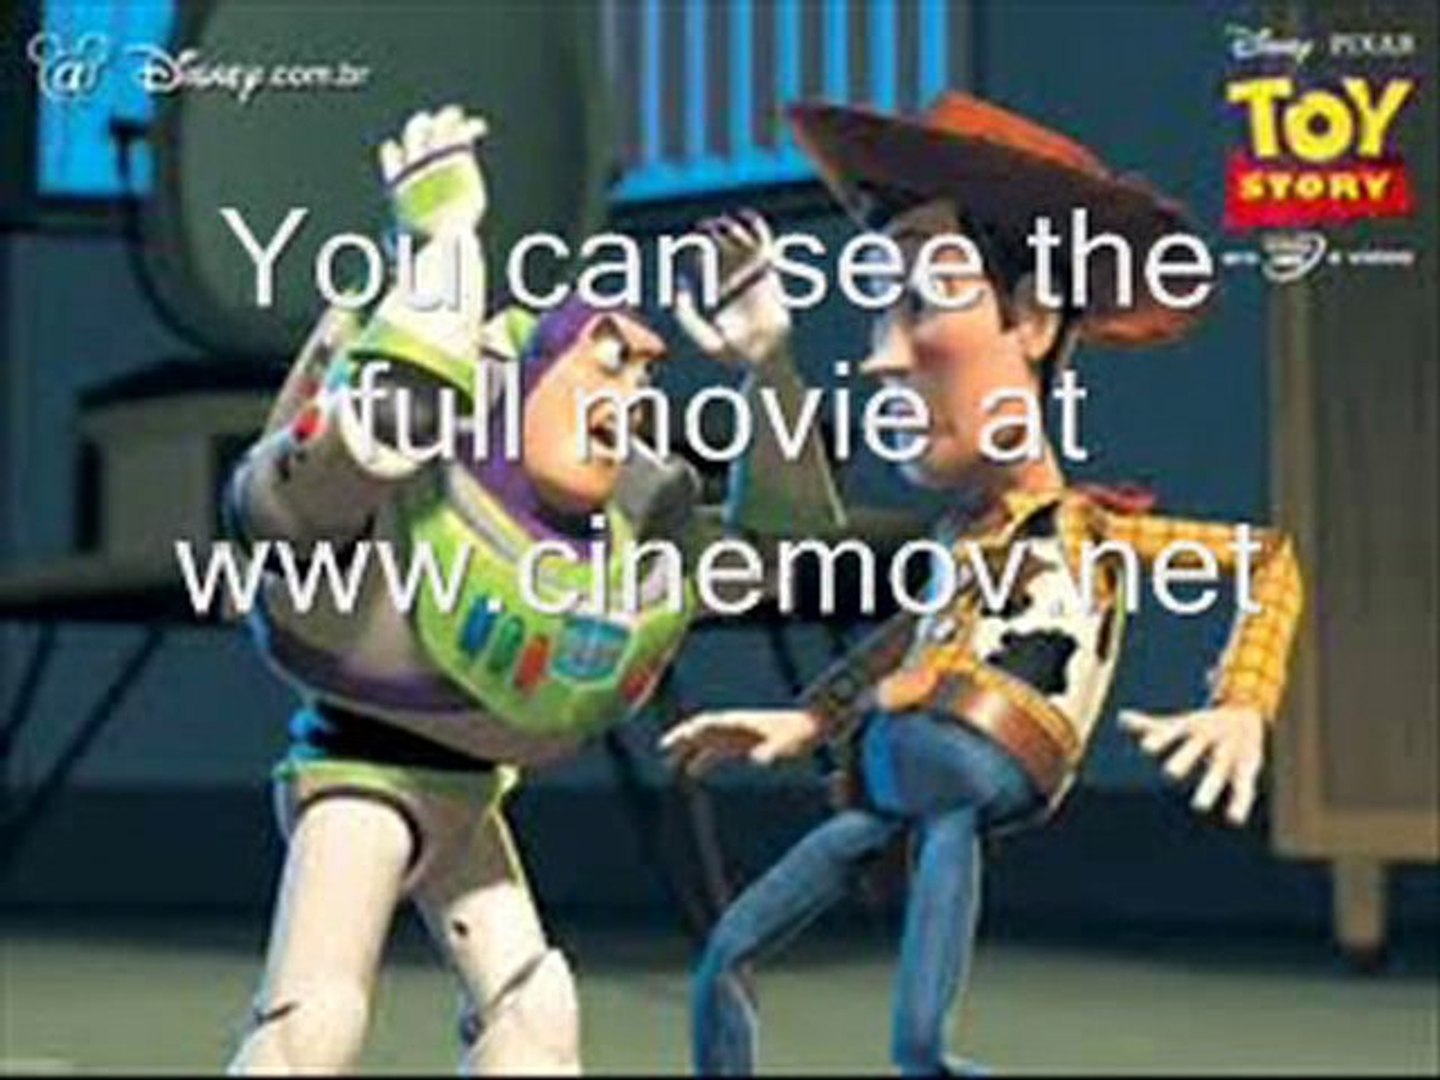 Toy Story 3 - Bonnie Playing with Toys-f3jsBtOl86g - video Dailymotion